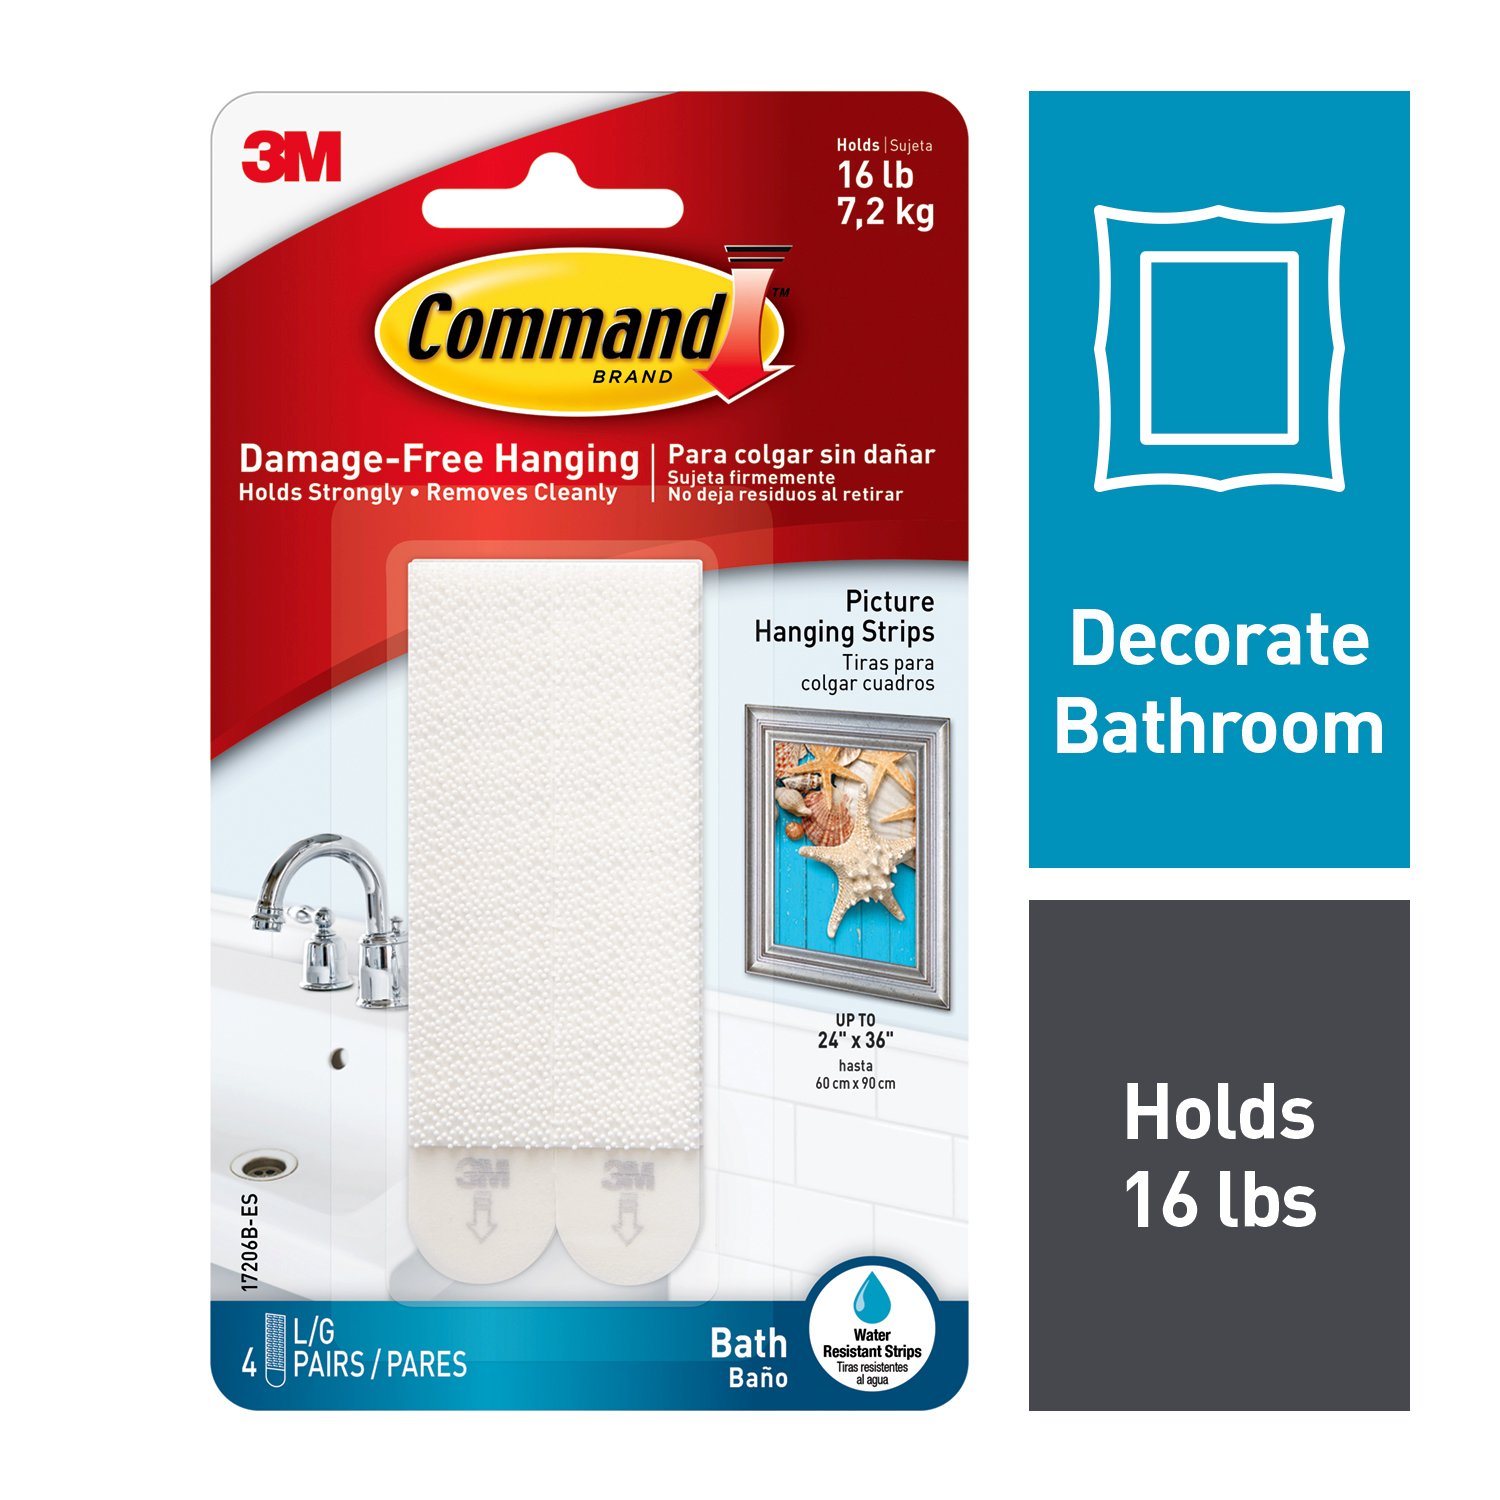 7100141327 - Command Large Bath Picture Hanging Strips 17206B-ES, Large